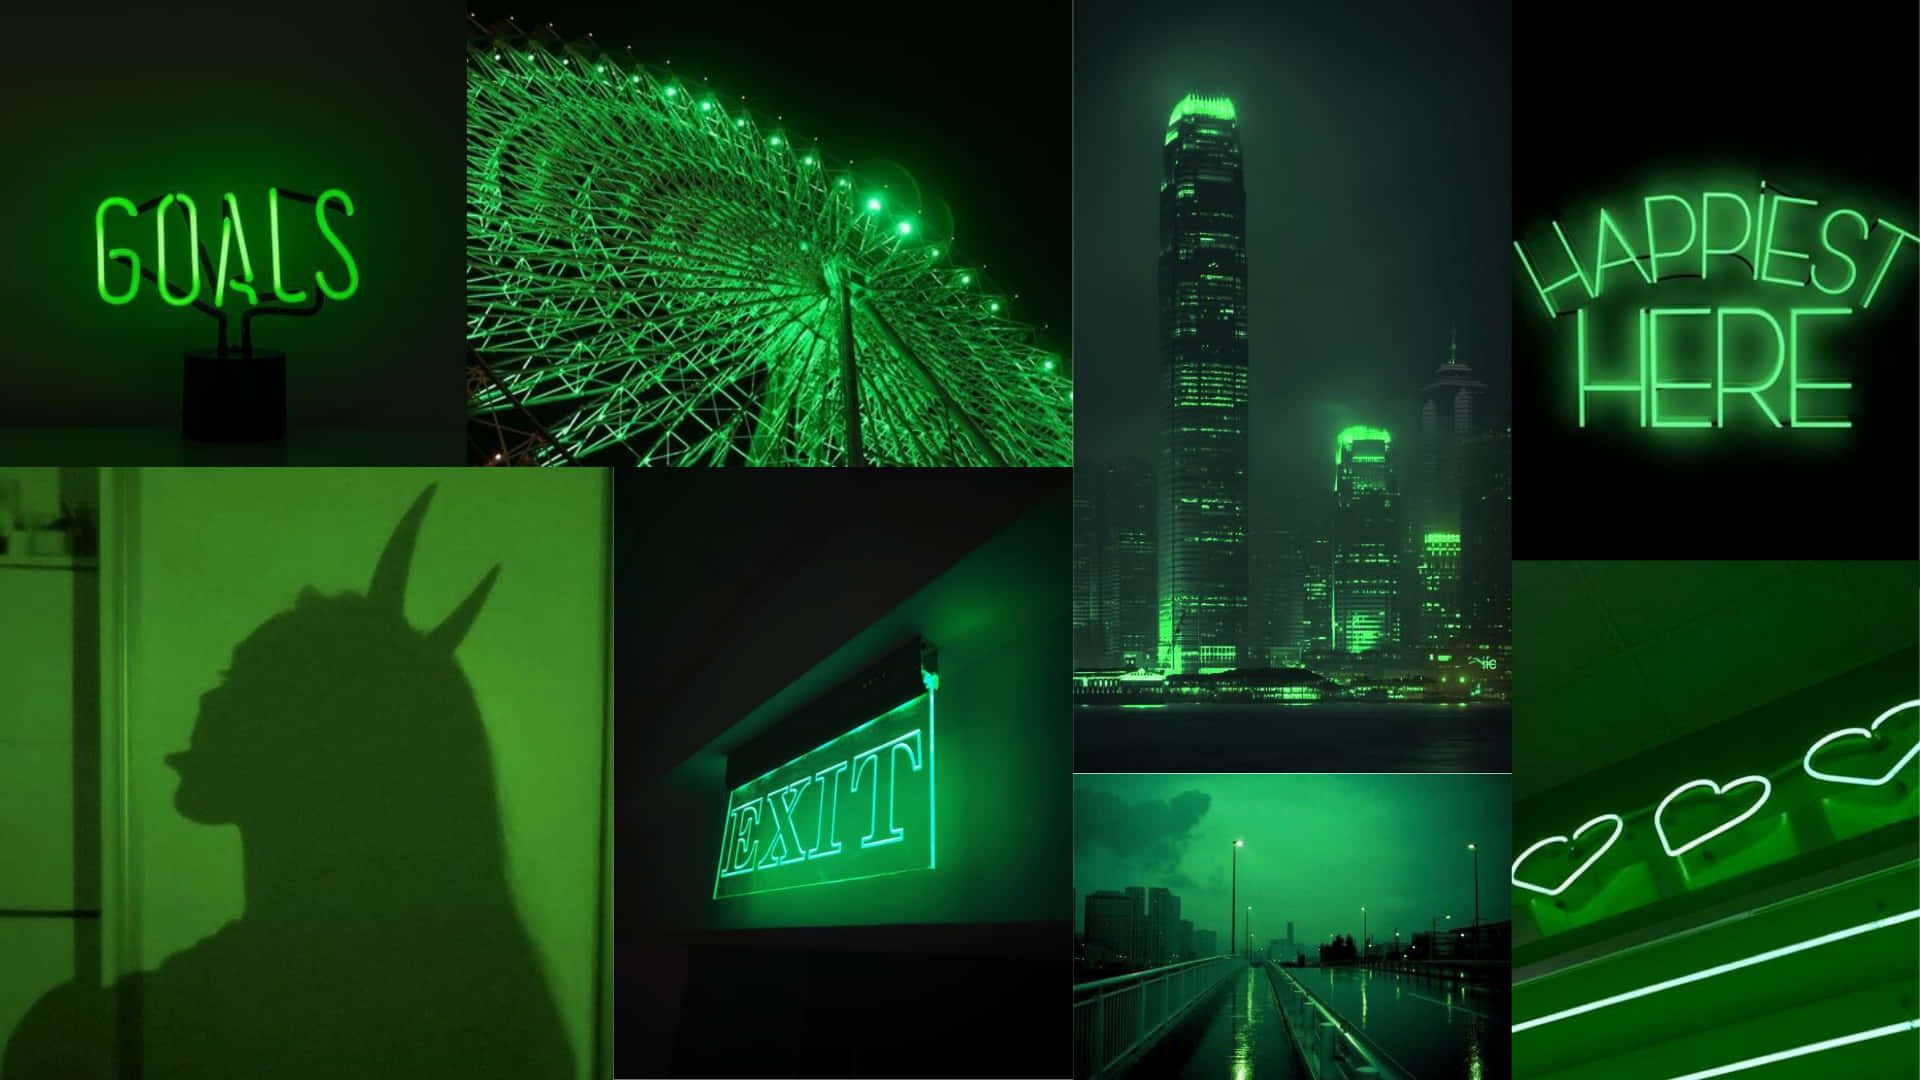 A collection of green neon signs - Neon green, lime green